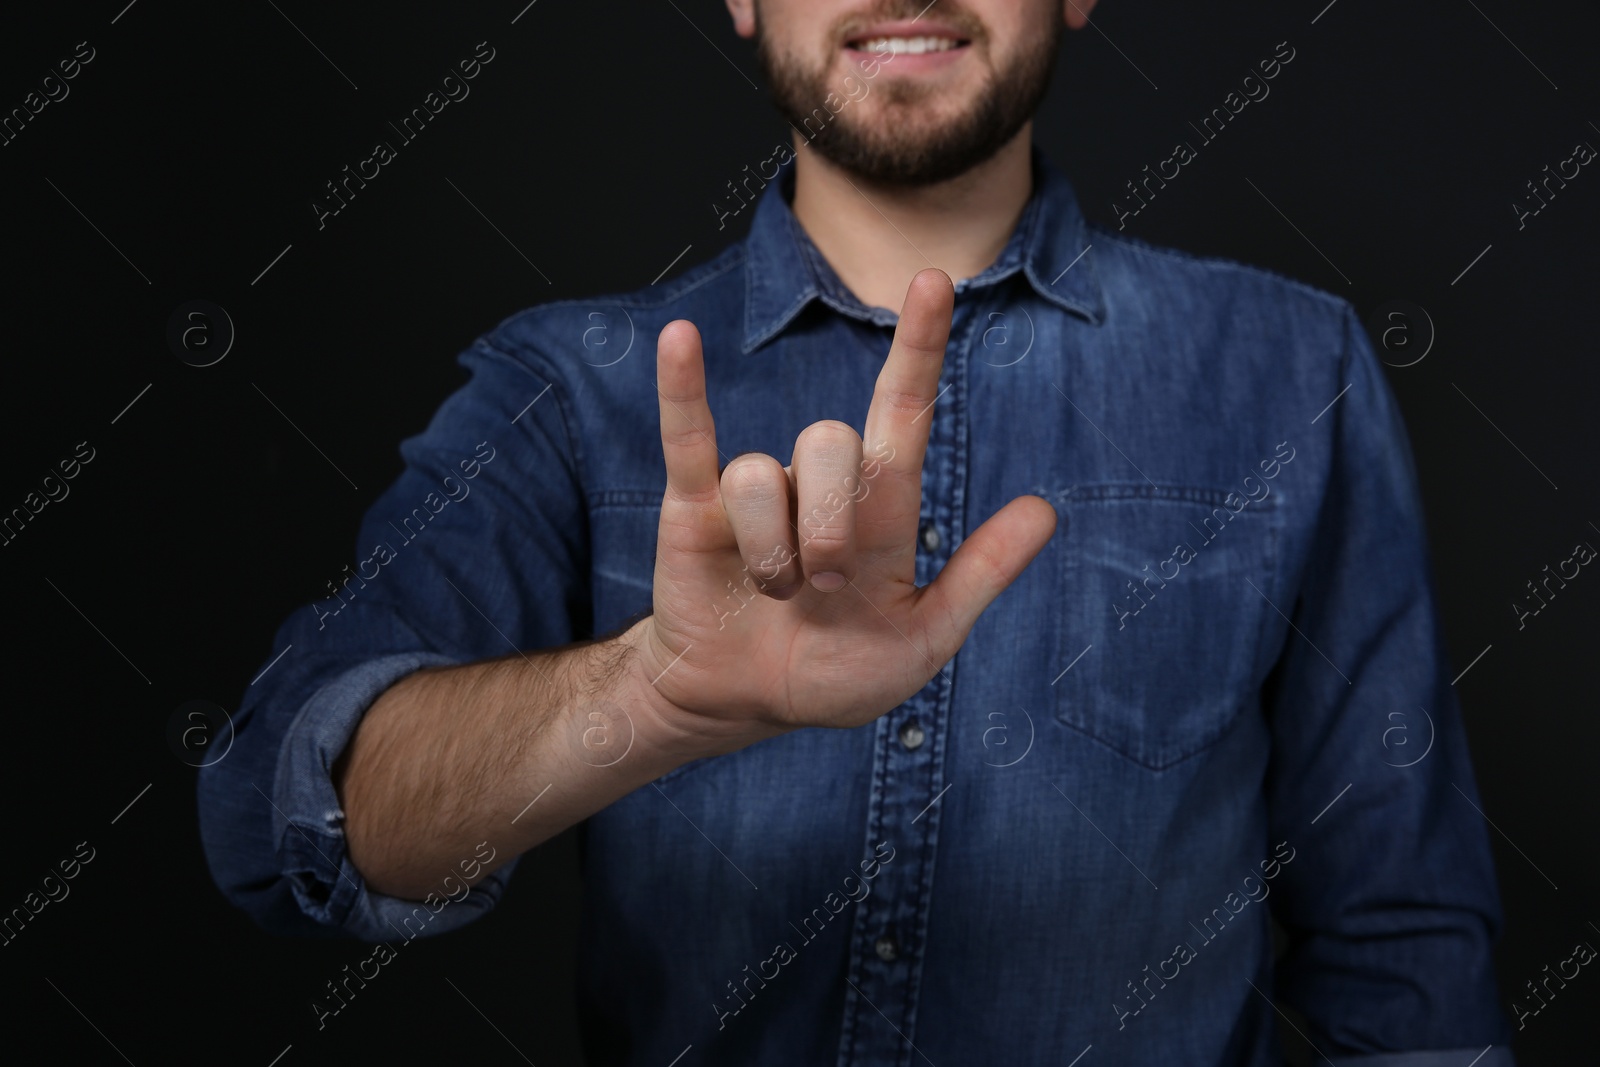 Photo of Man showing I LOVE YOU gesture in sign language on black background, closeup